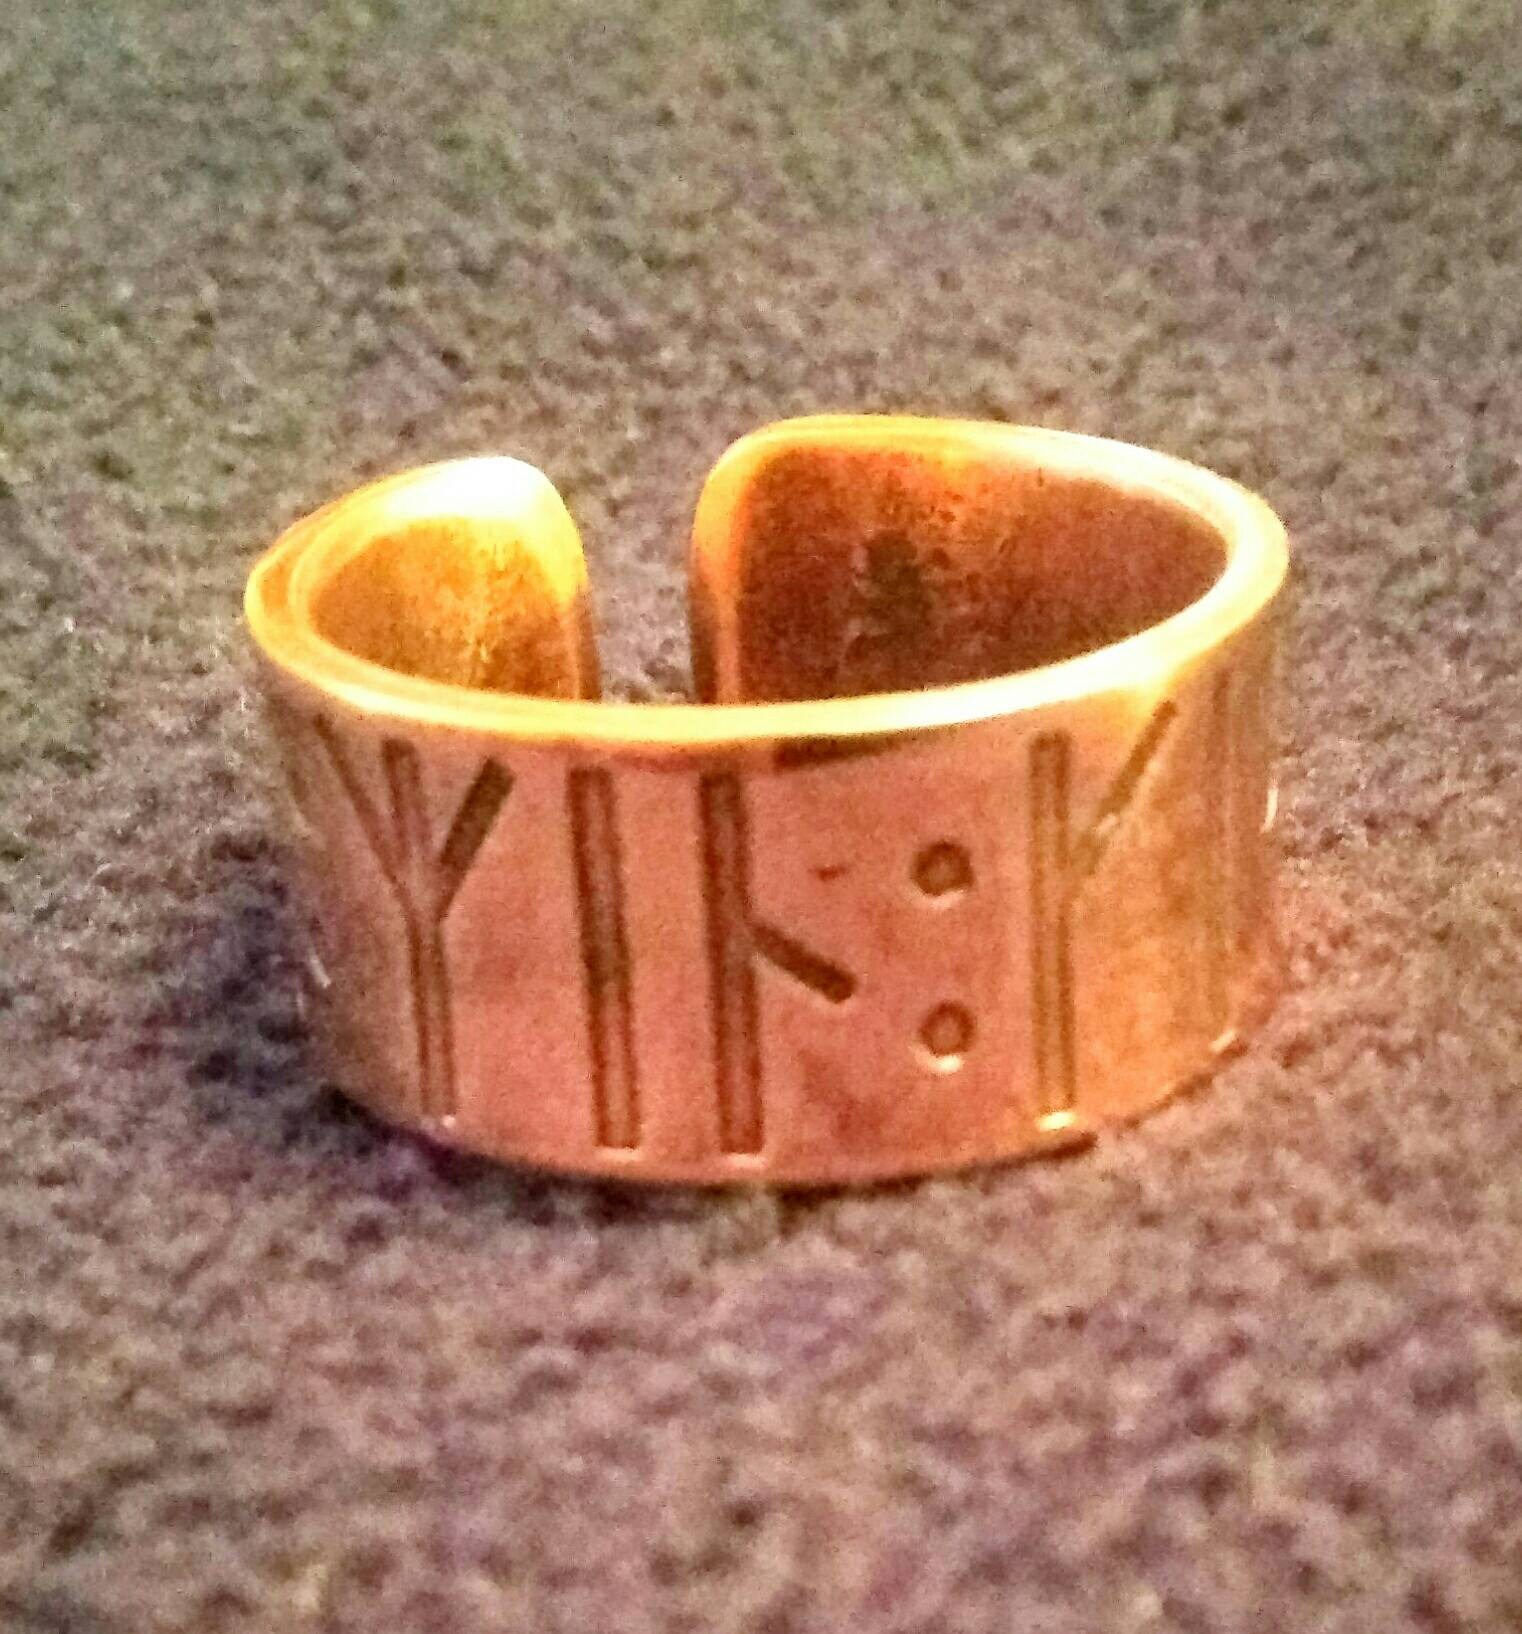 Kiss Me, My Love Ring - Viking, Norse, Younger Futhark Rune Inscription Love Poetry. Pagan Heathen Wedding Handfasting Copper Bronze Brass